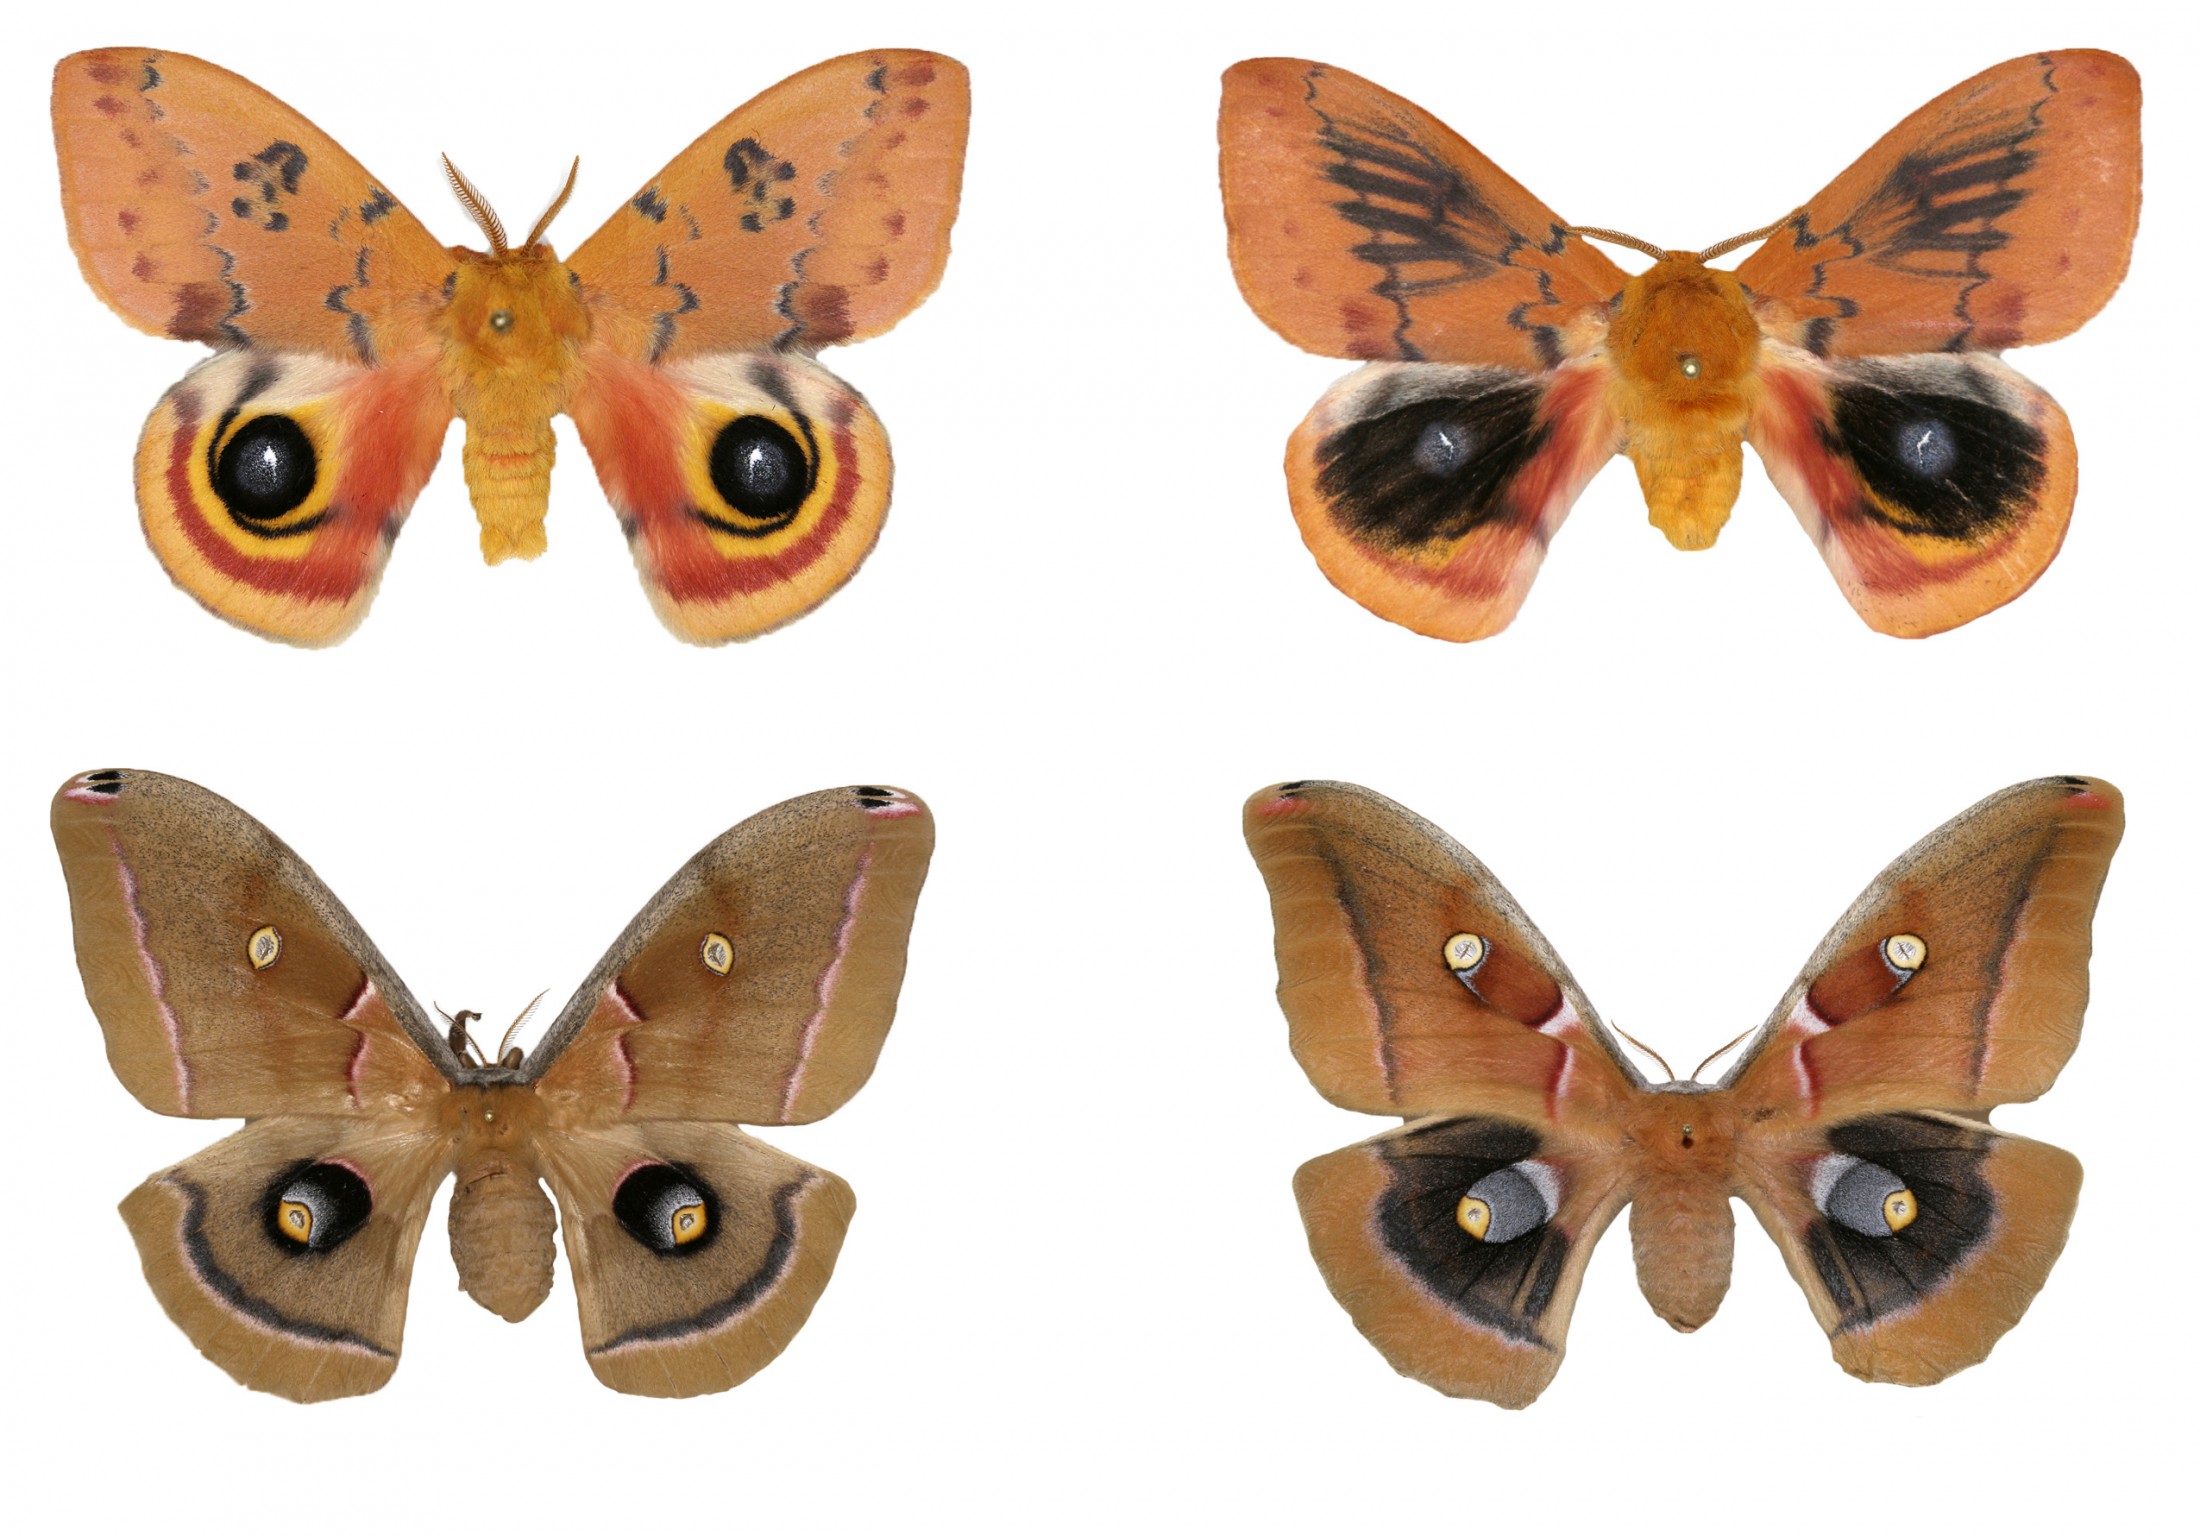 Lyin' eyes: Butterfly, moth eyespots may look the same, but likely evolved  separately – Research News